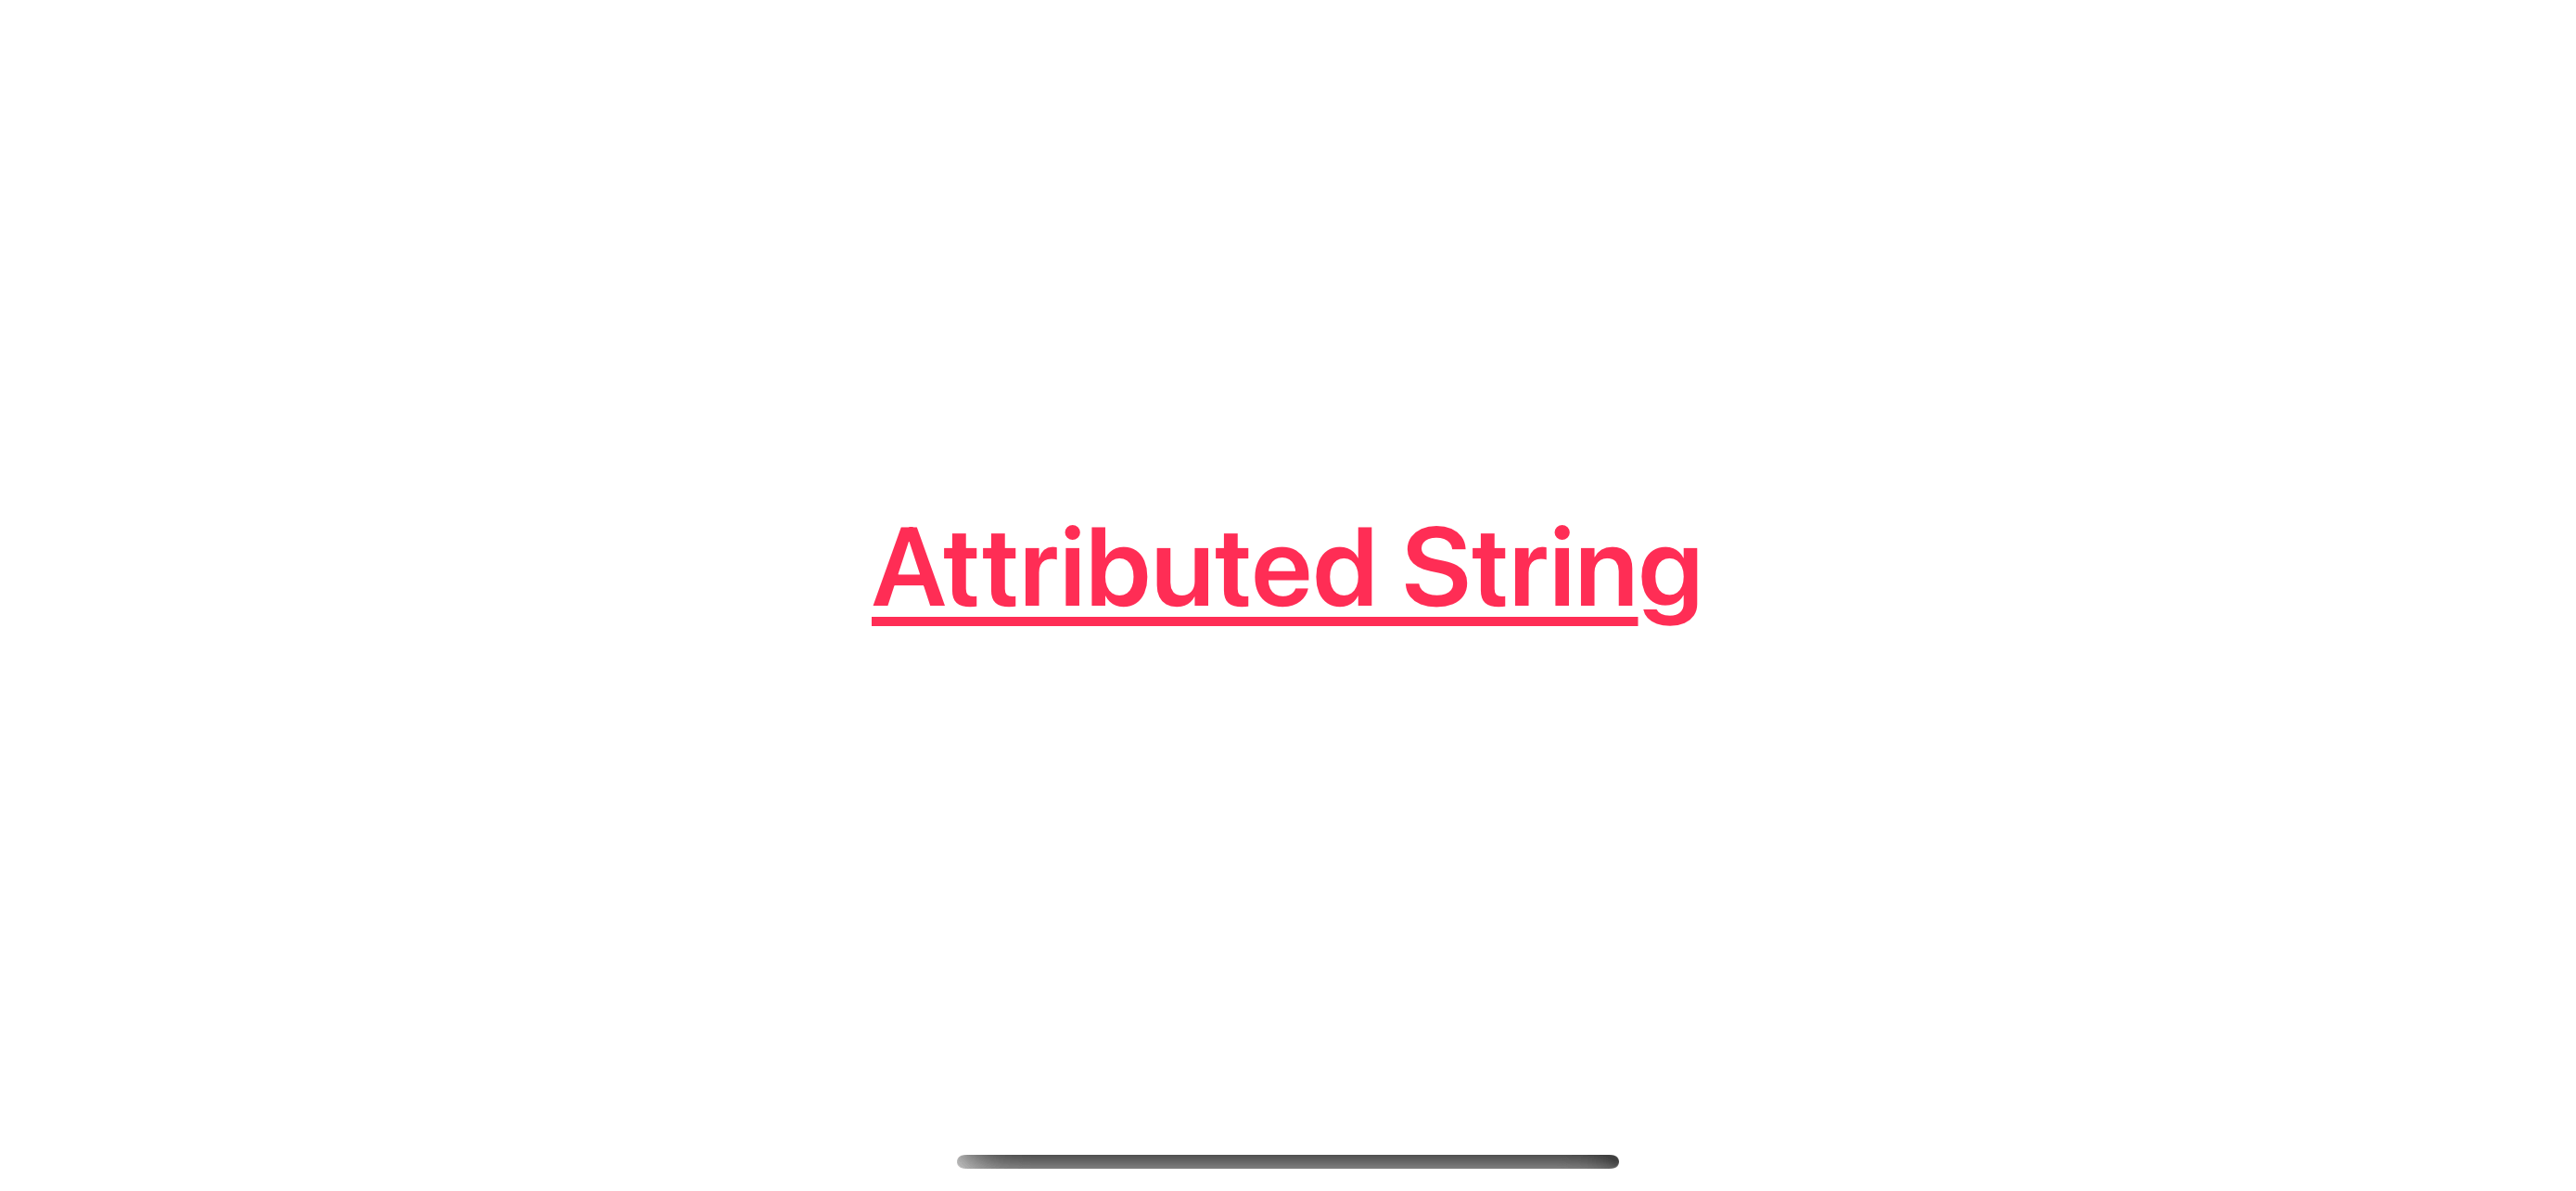 Use NSAttributedString in SwiftUI by convert it to AttributedString.